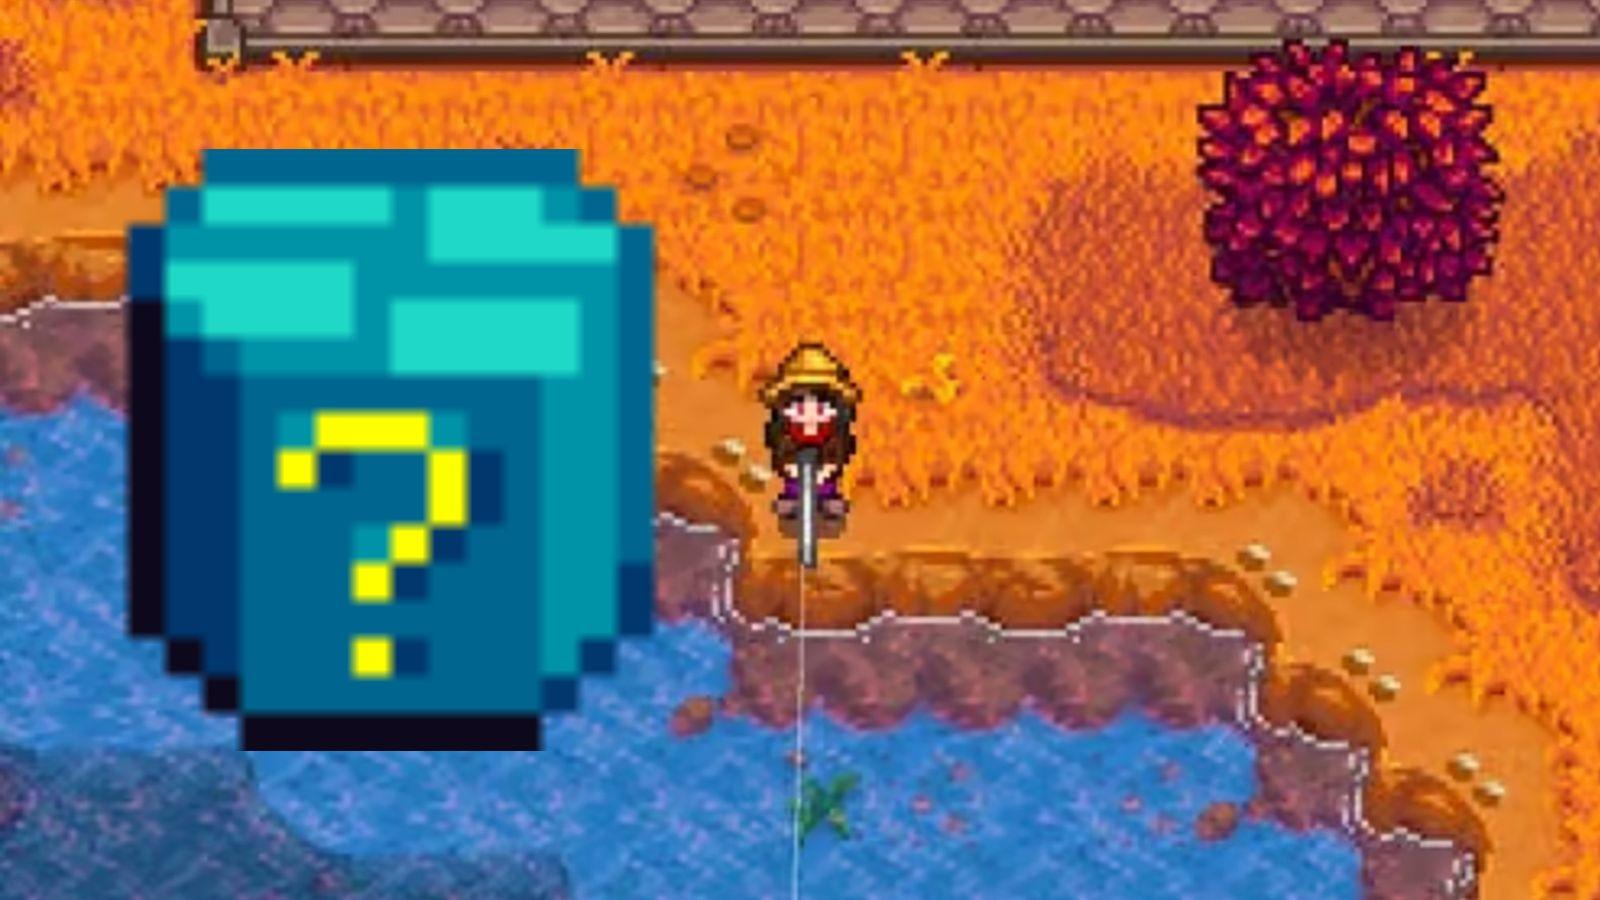 An image of a mystery box in Stardew Valley.